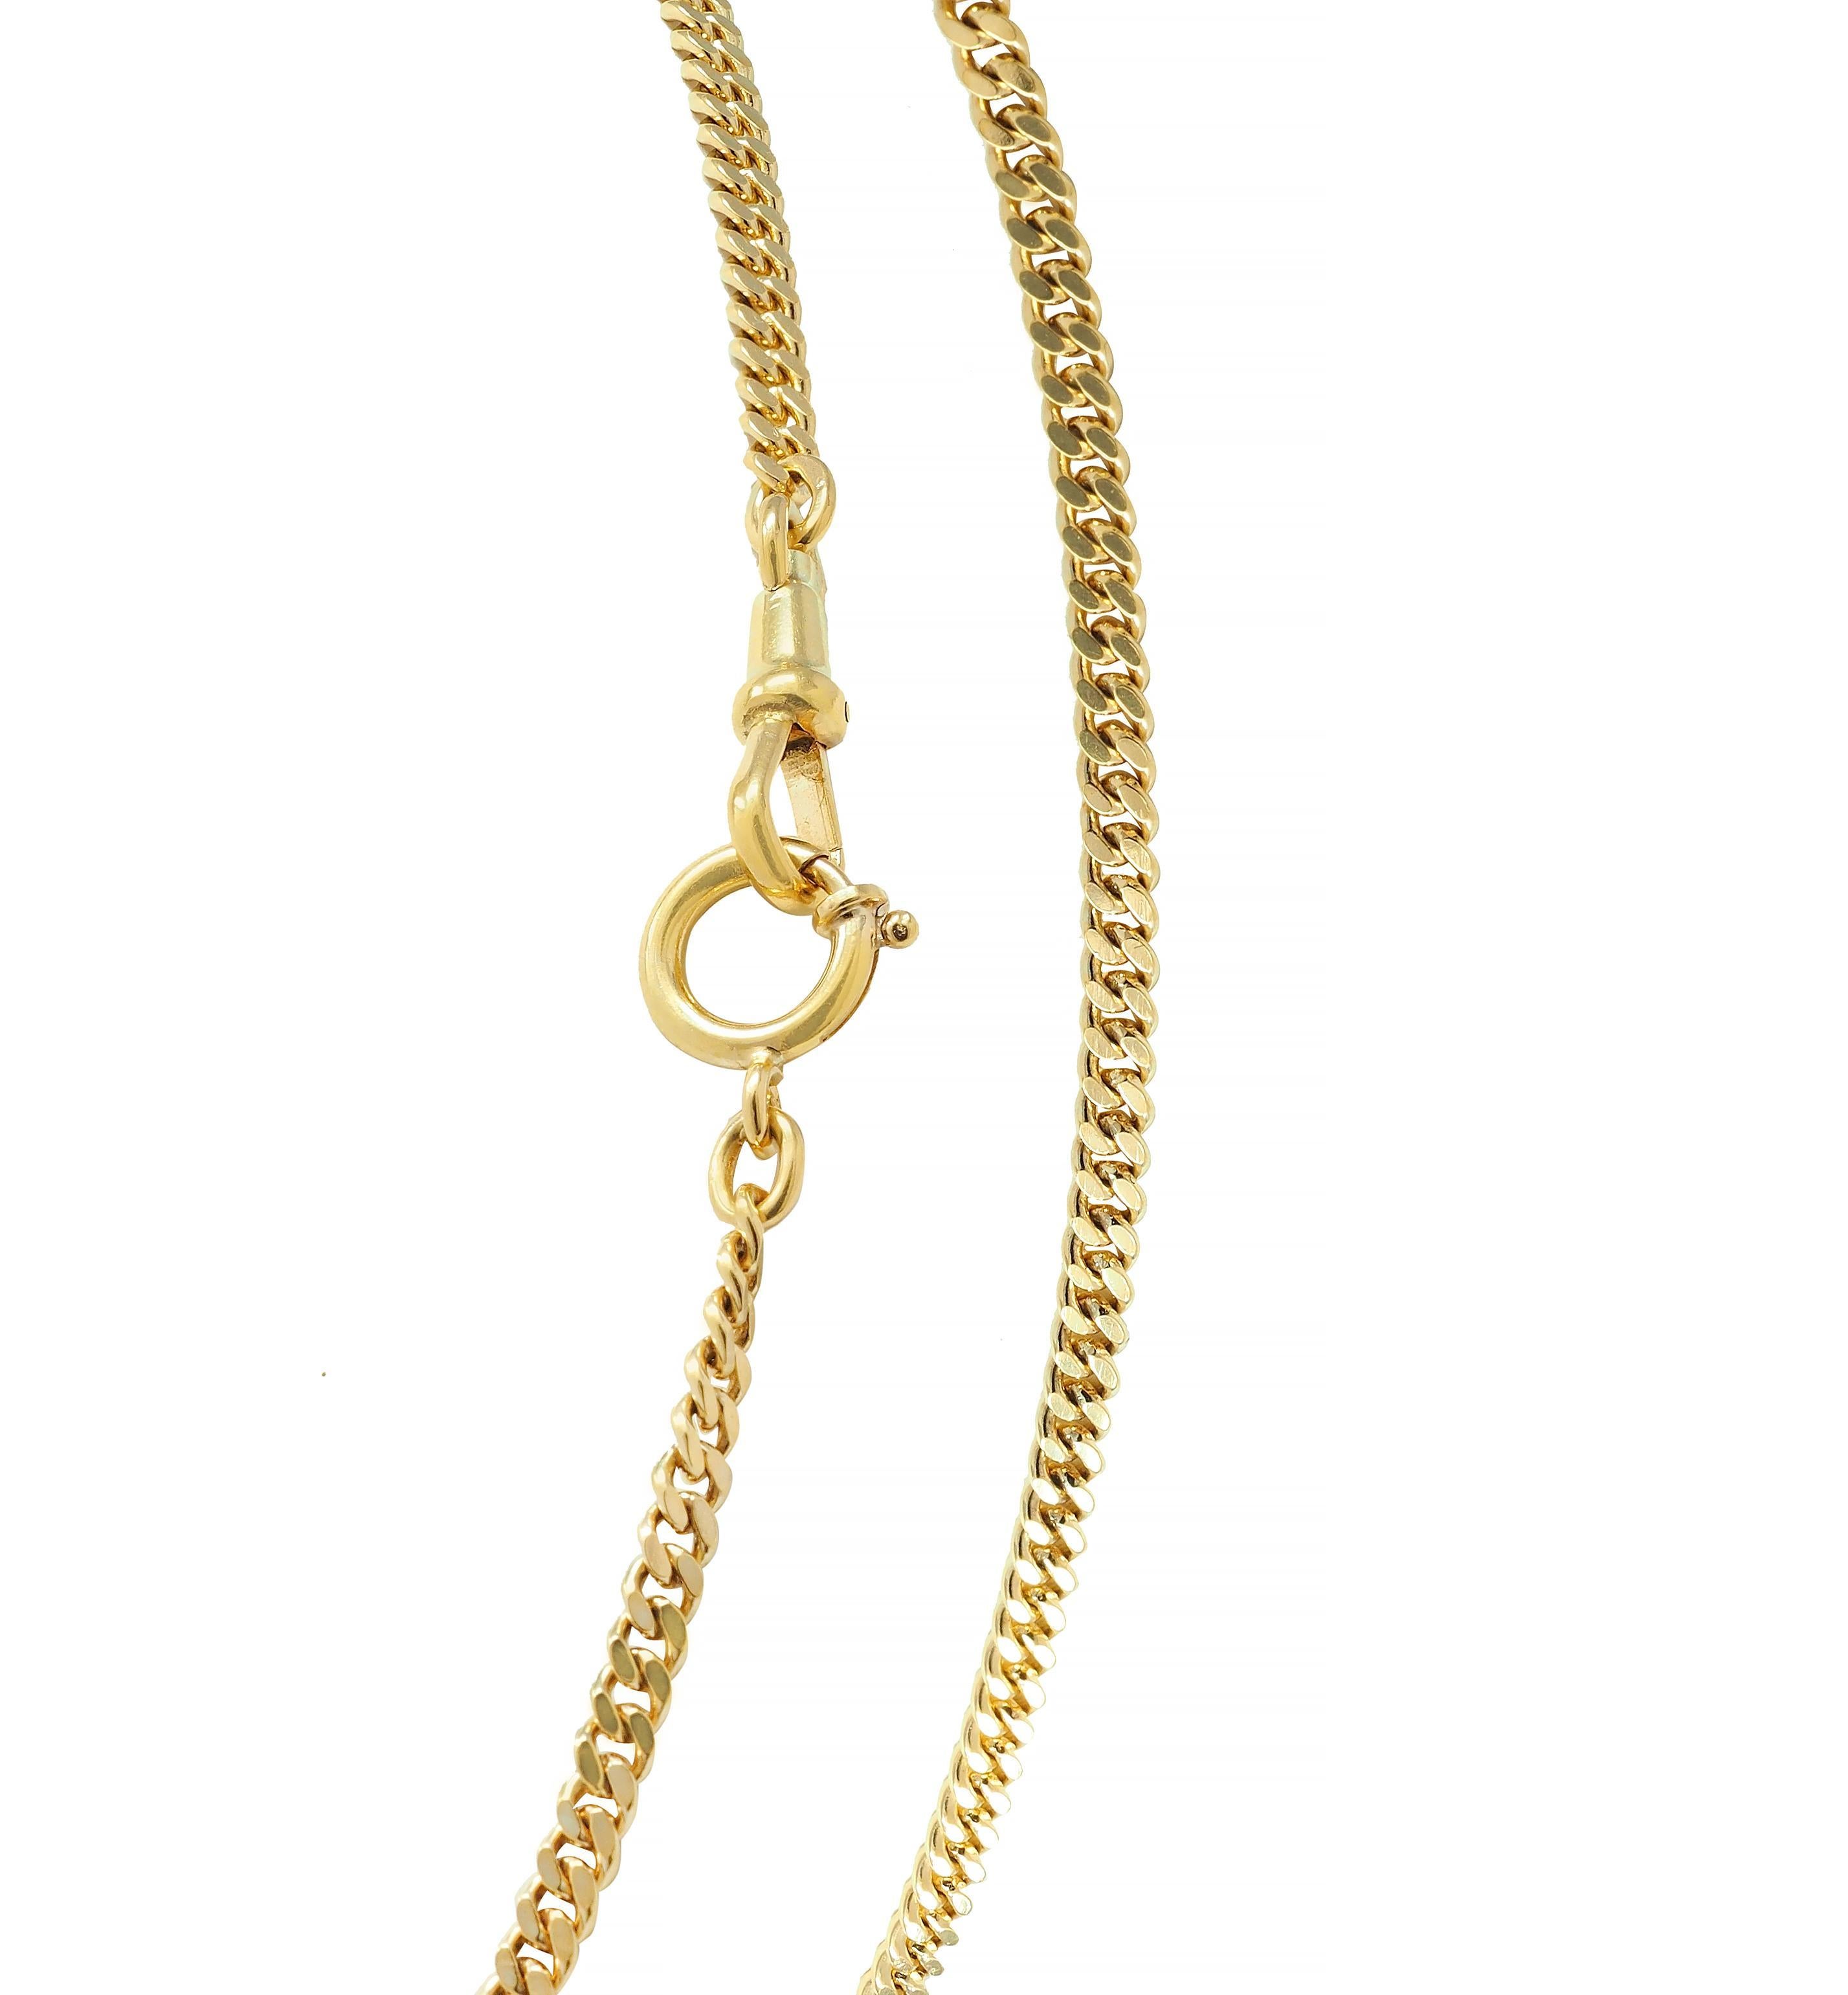 Vintage 18 Karat Yellow Gold Curb Link Chain Necklace For Sale 2